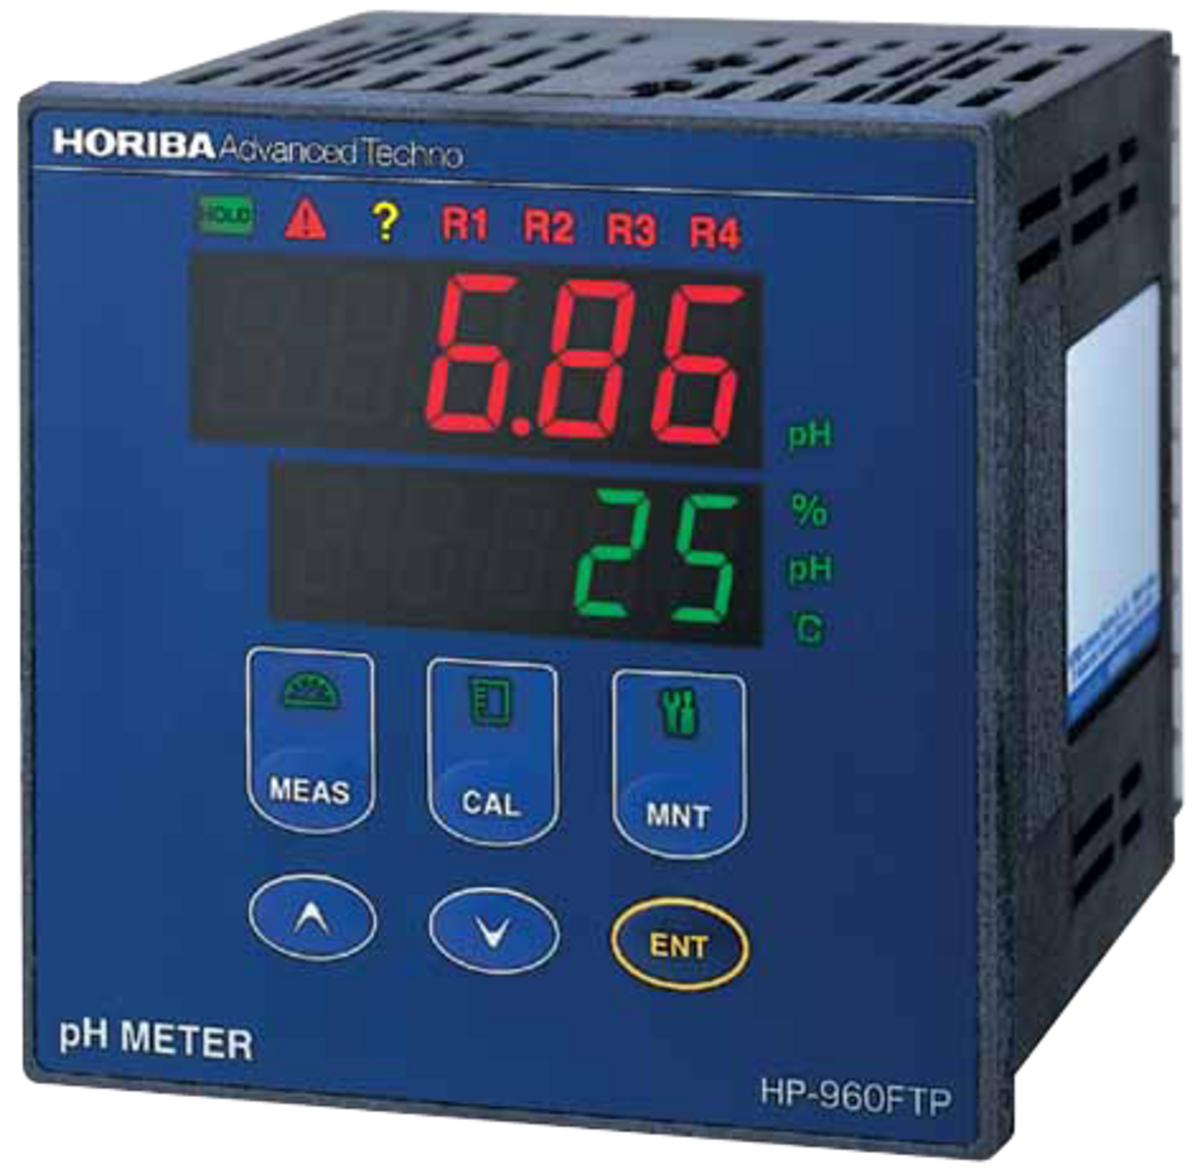 hp-960ftp-panel-mount-type-ph-meter-four-wire-transmission-4-point